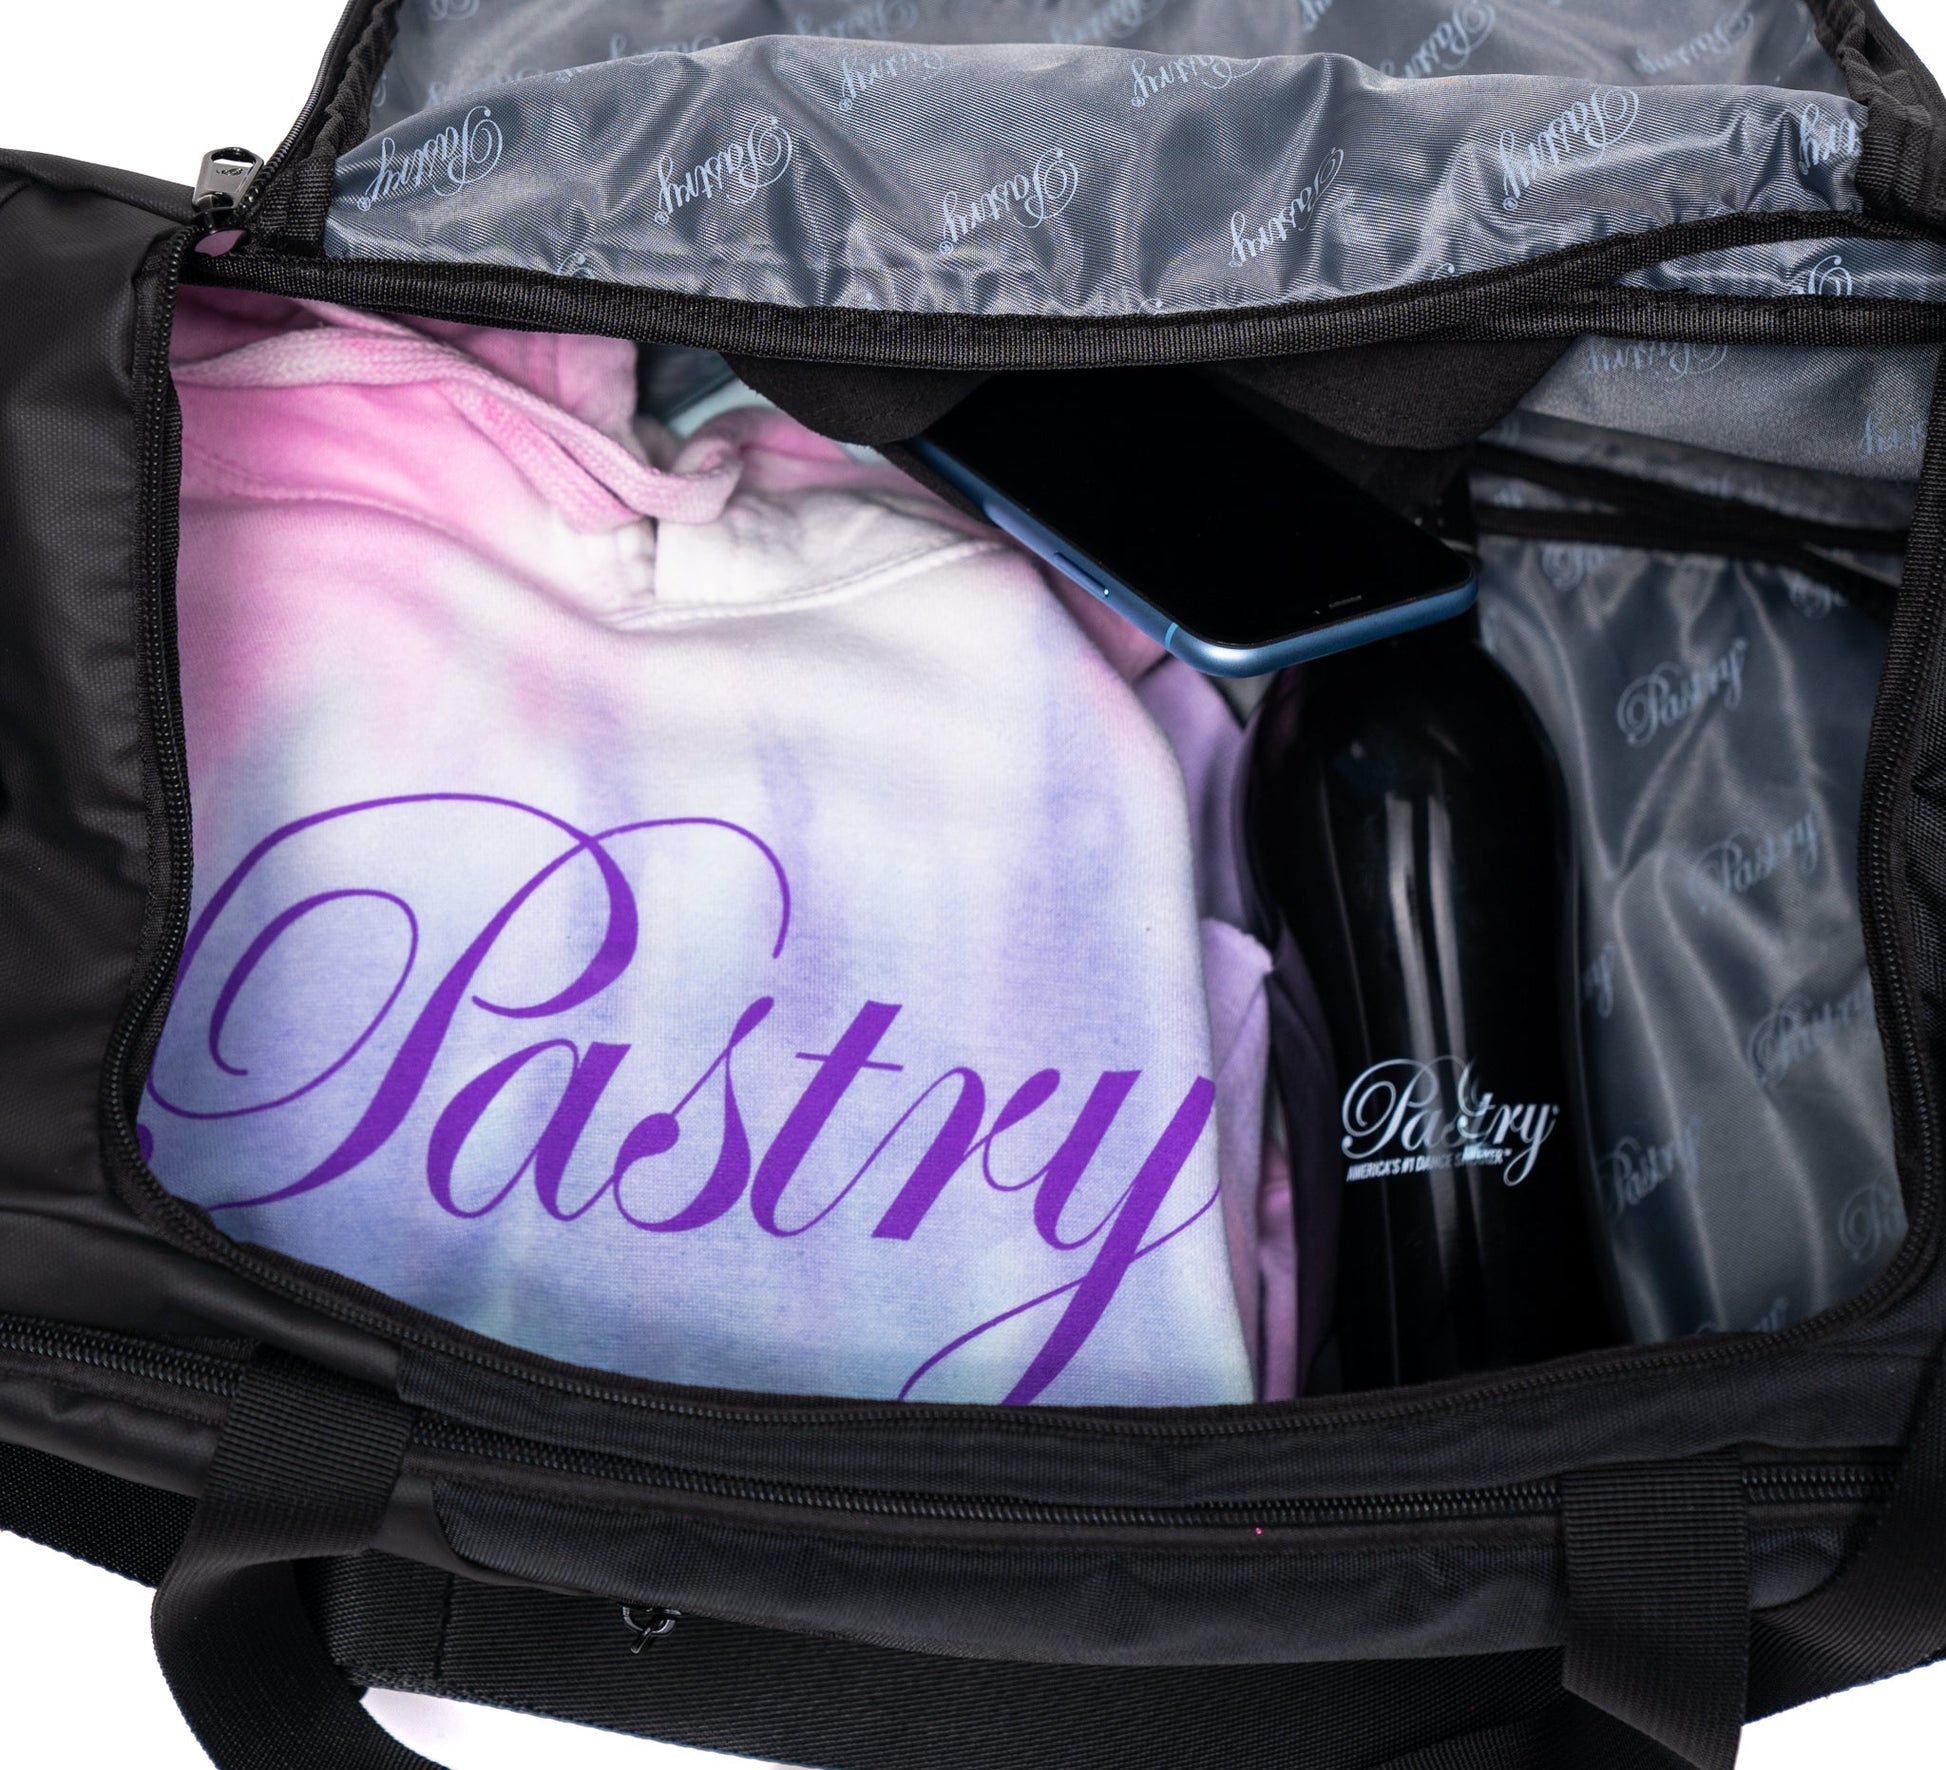 Pastry Duffle Bag Solid Black with clothes and tumbler inside